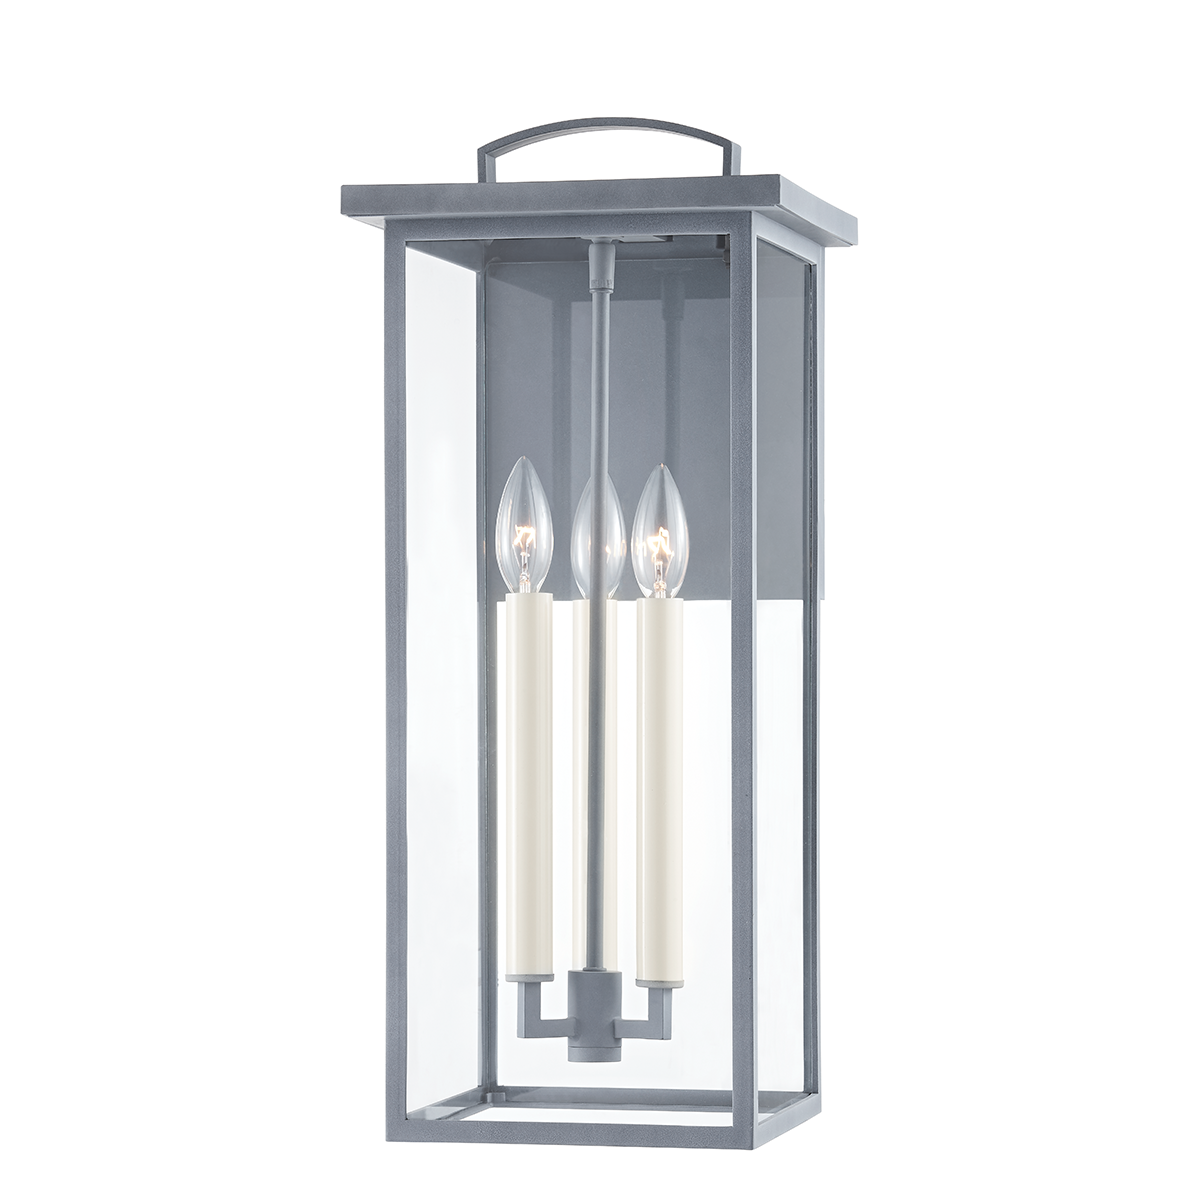 Troy EDEN 3 LIGHT LARGE EXTERIOR WALL SCONCE B7523 Outdoor l Wall Troy Lighting   